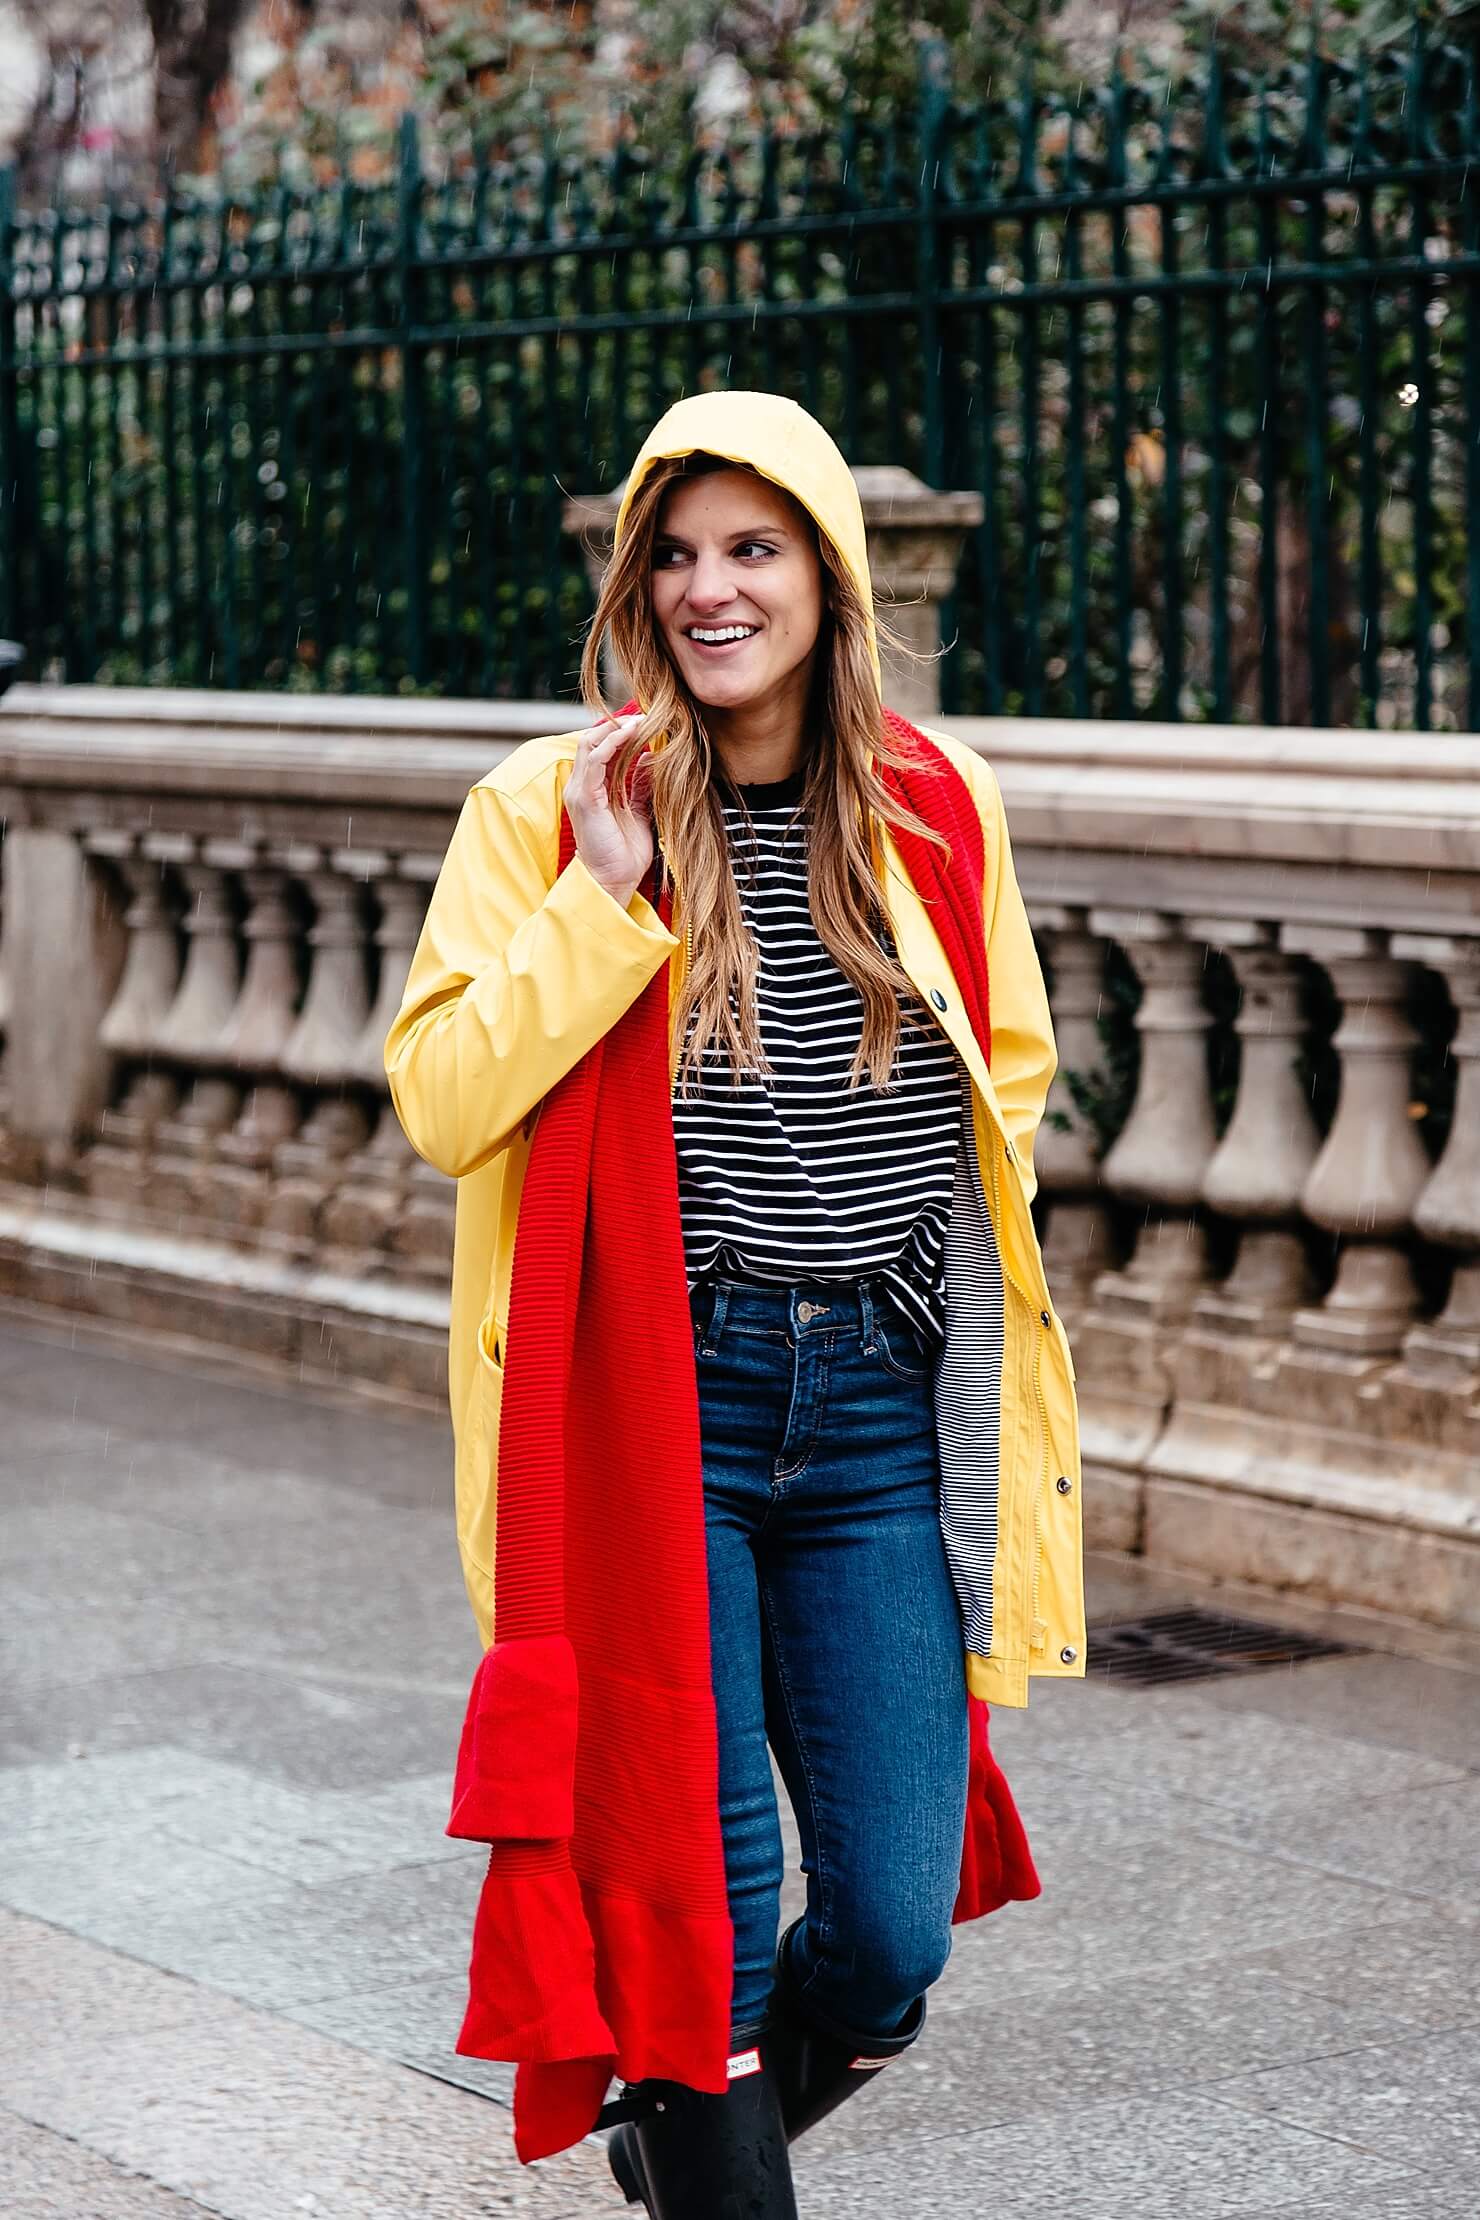 hunter boots, jeans, black and white striped tee, yellow rain jacket, red scarf, rainy day outfit